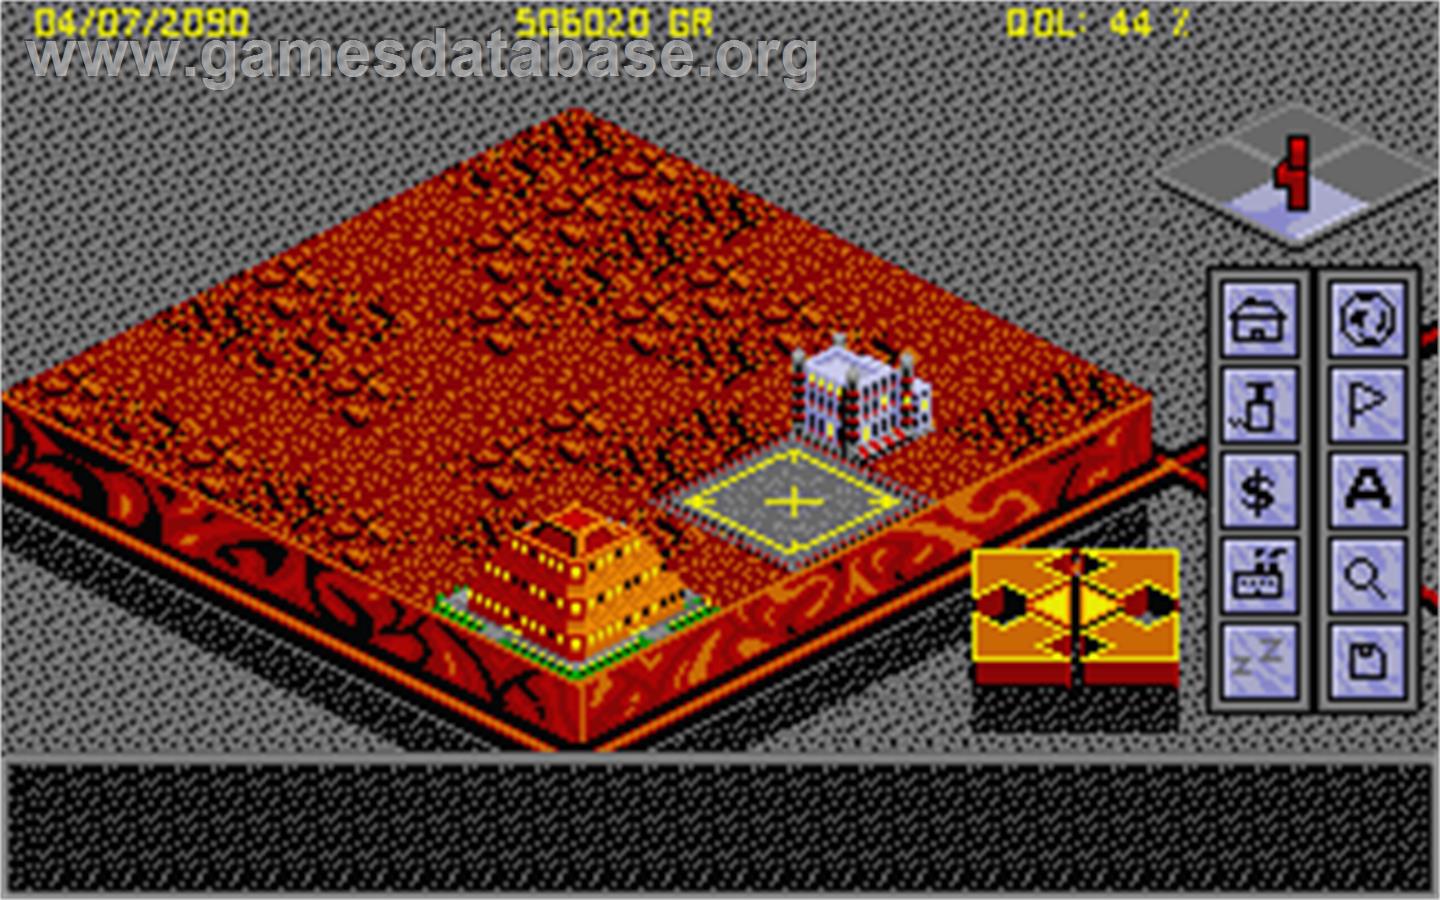 Utopia: The Creation of a Nation - Atari ST - Artwork - In Game